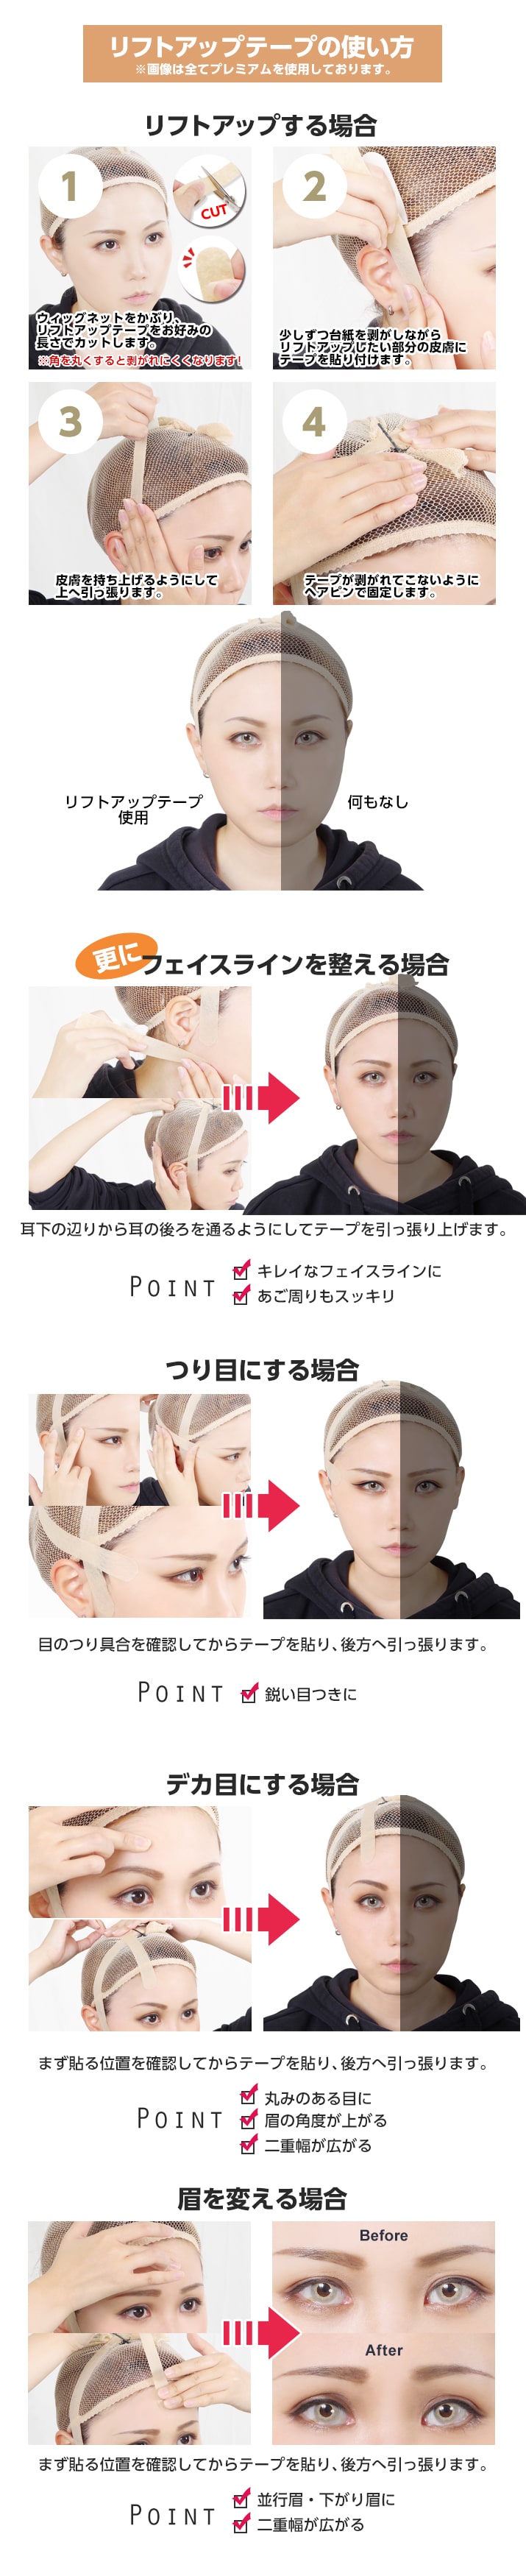 Classe Face Cleansing Tape, 1 Piece, Cosplay, Inconspicuous Eyes, Wrinkles,  Spray, Correction, Shaping, Lift-Up Tape-Italy-Japan Online Shopping - Hommi